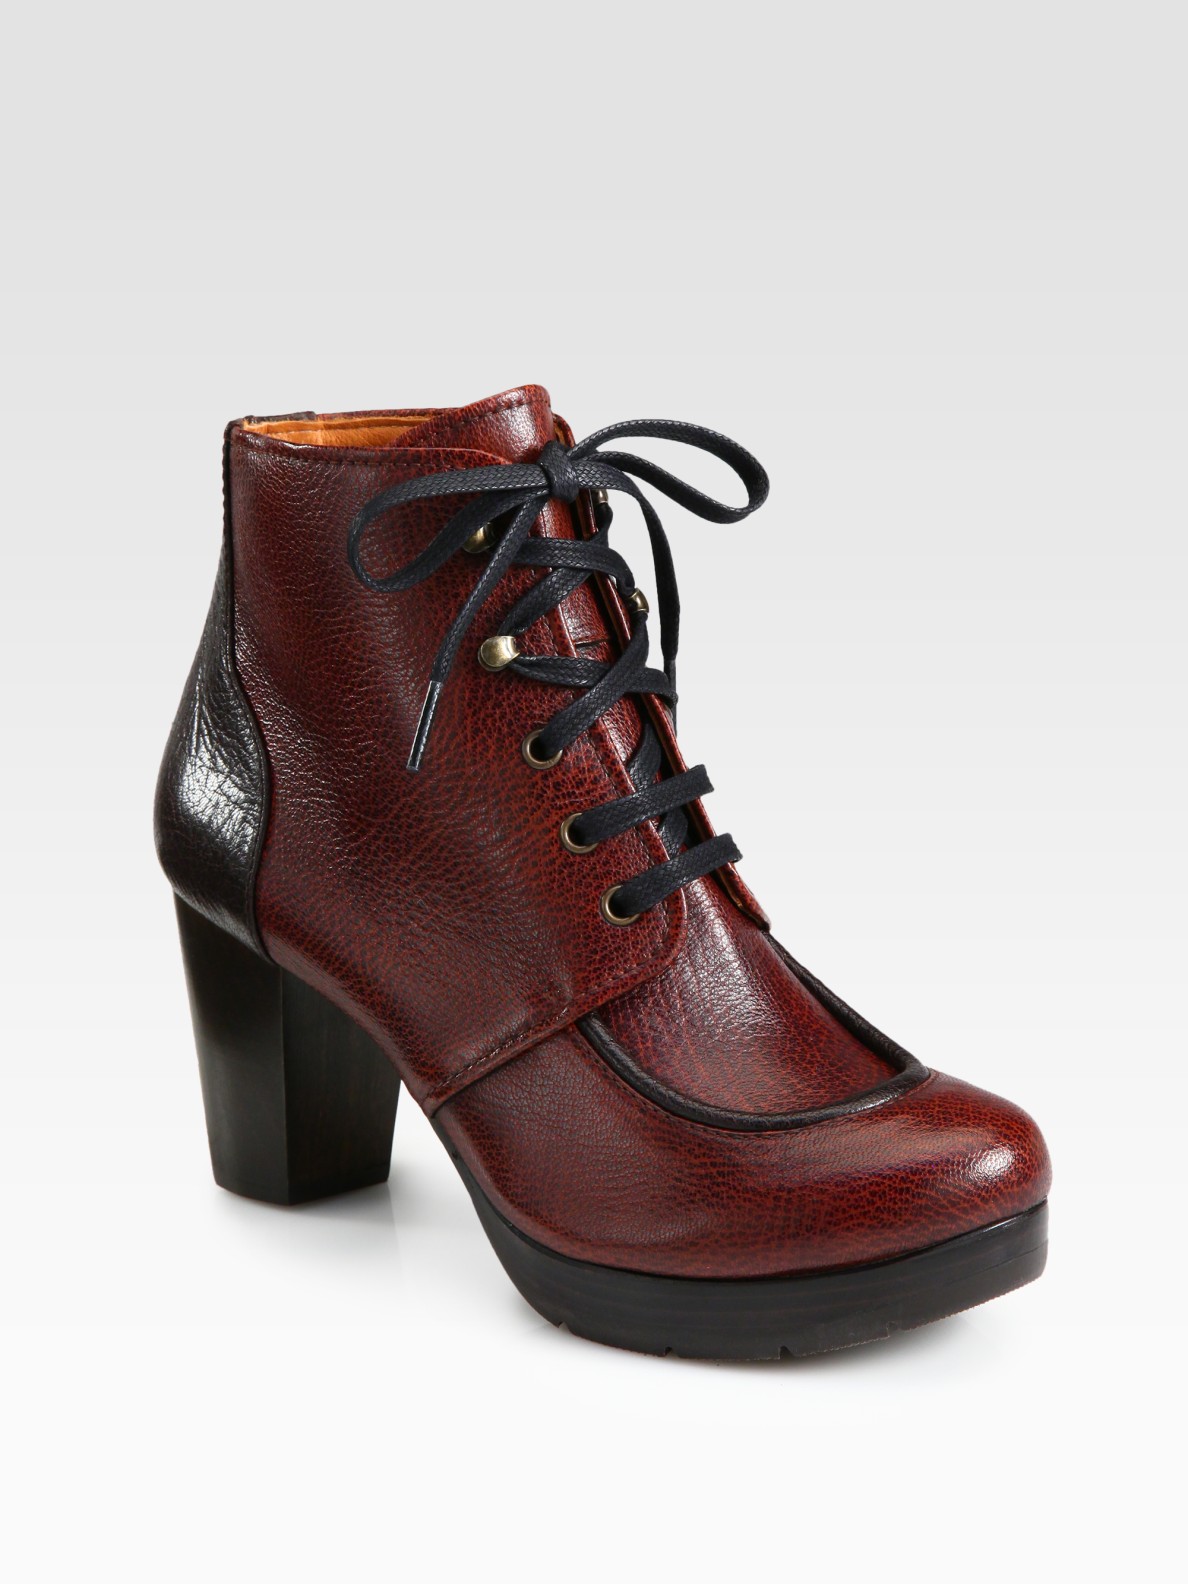 Chie Mihara Bicolor Leather Laceup Ankle Boots in Purple (bordeaux) | Lyst